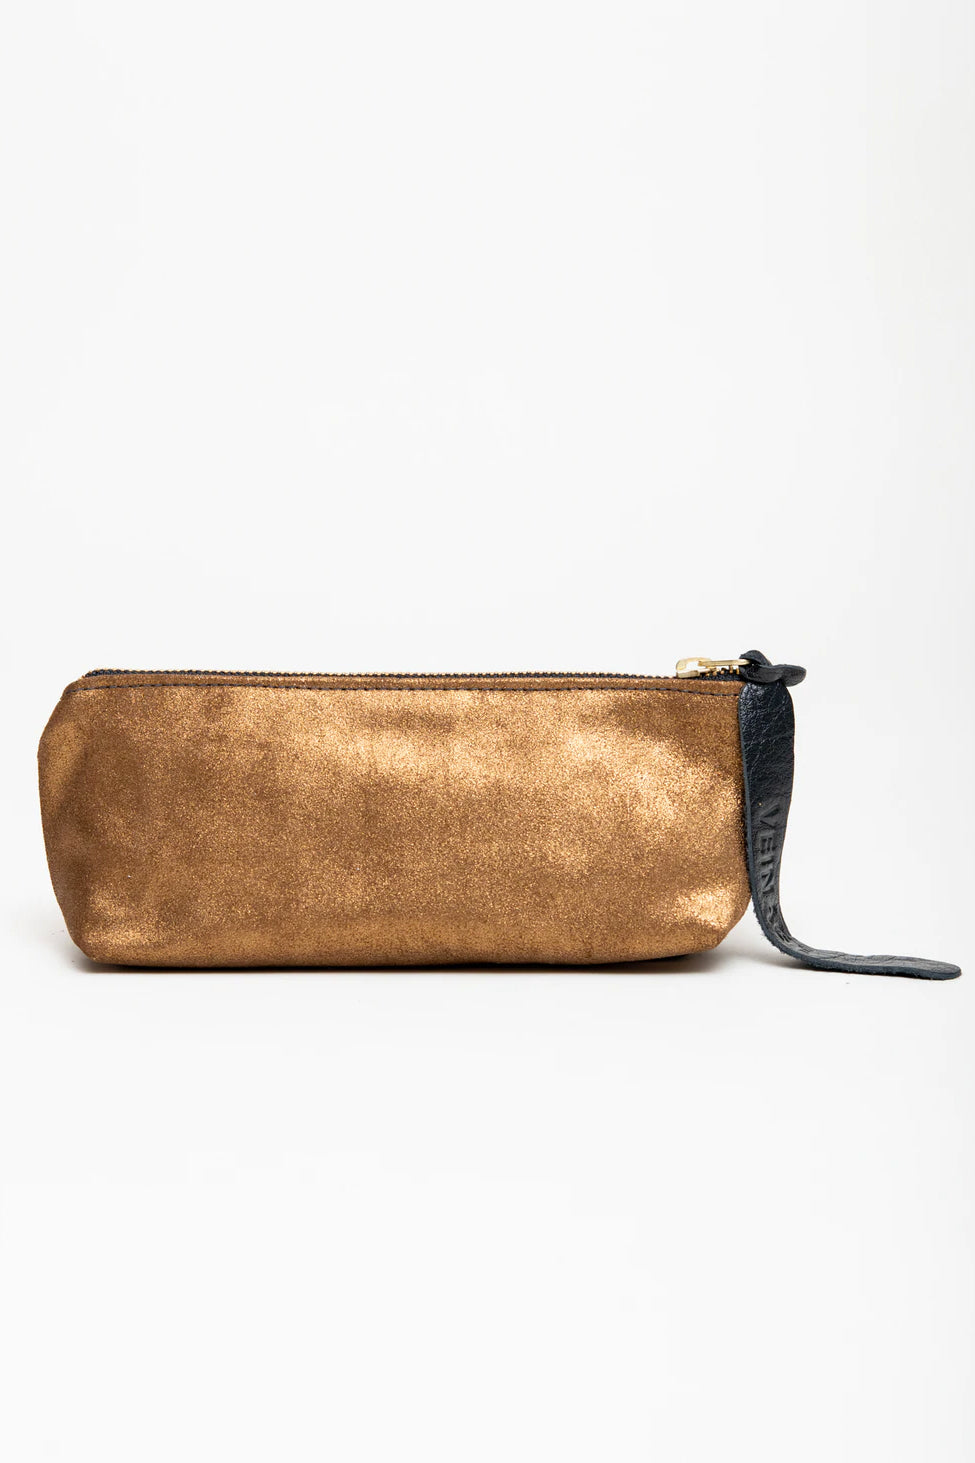 Turin Leather Pencil/Cosmetic Case